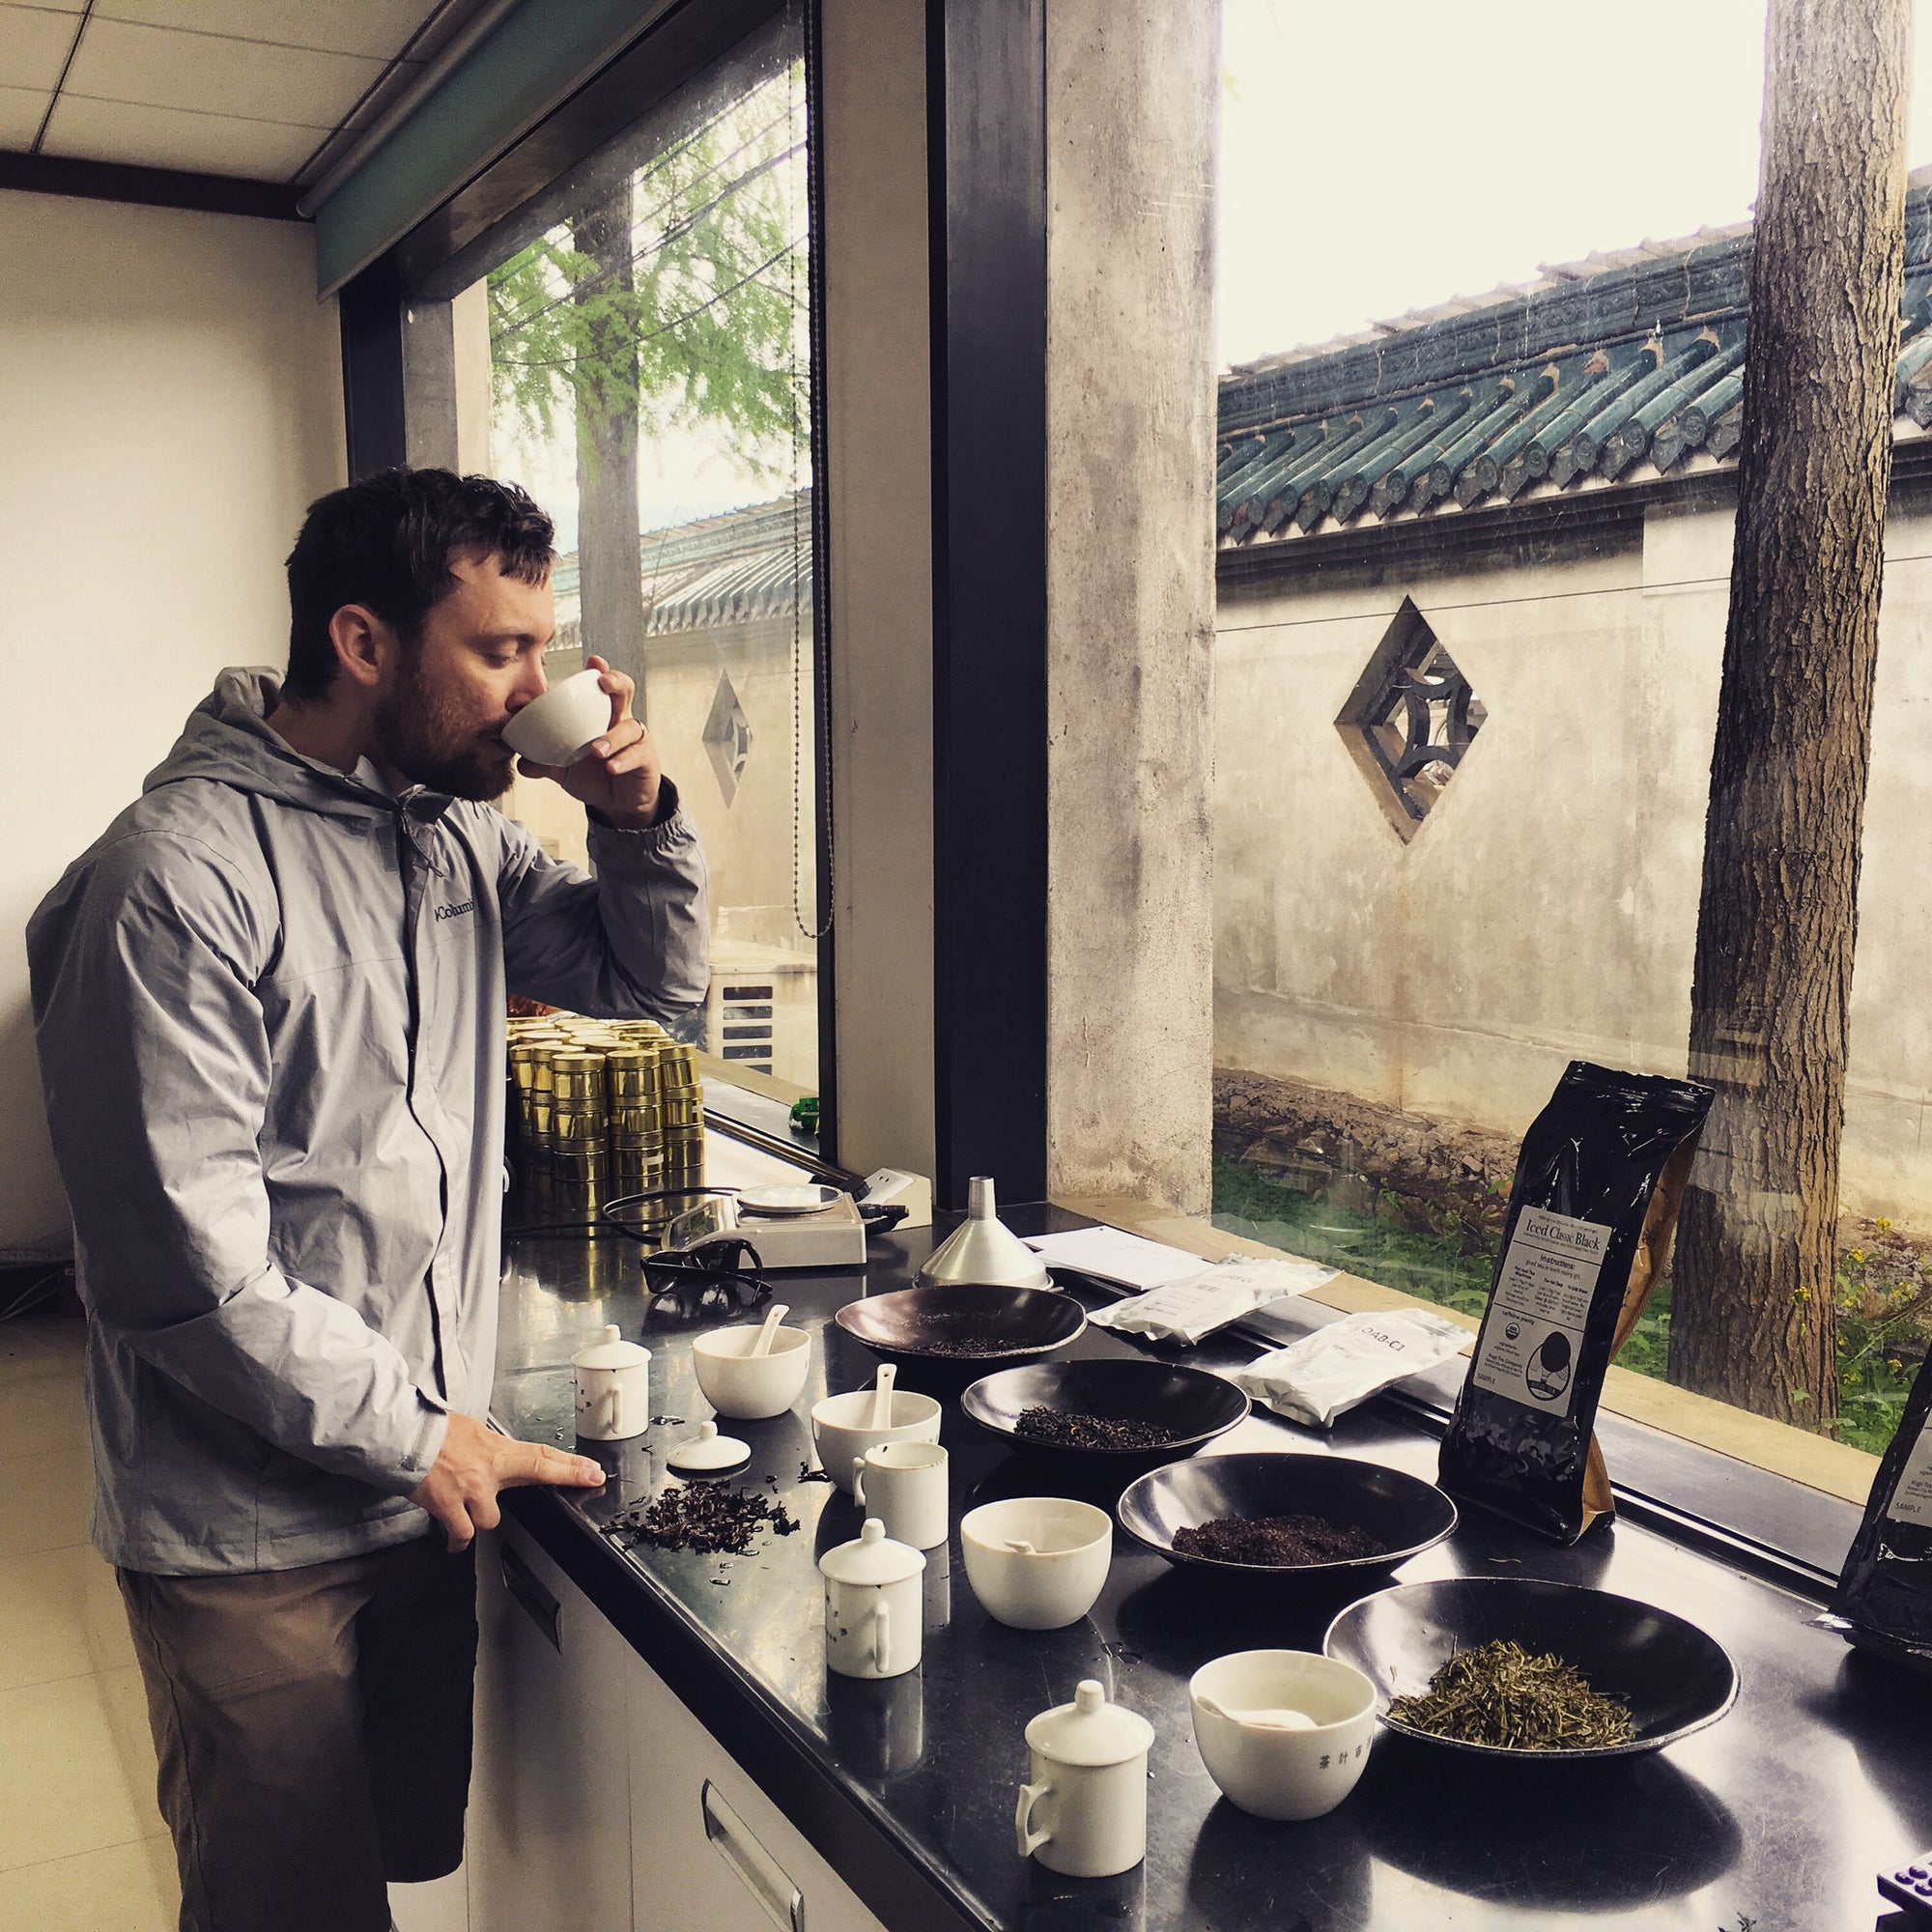 Tea cupping with a friend